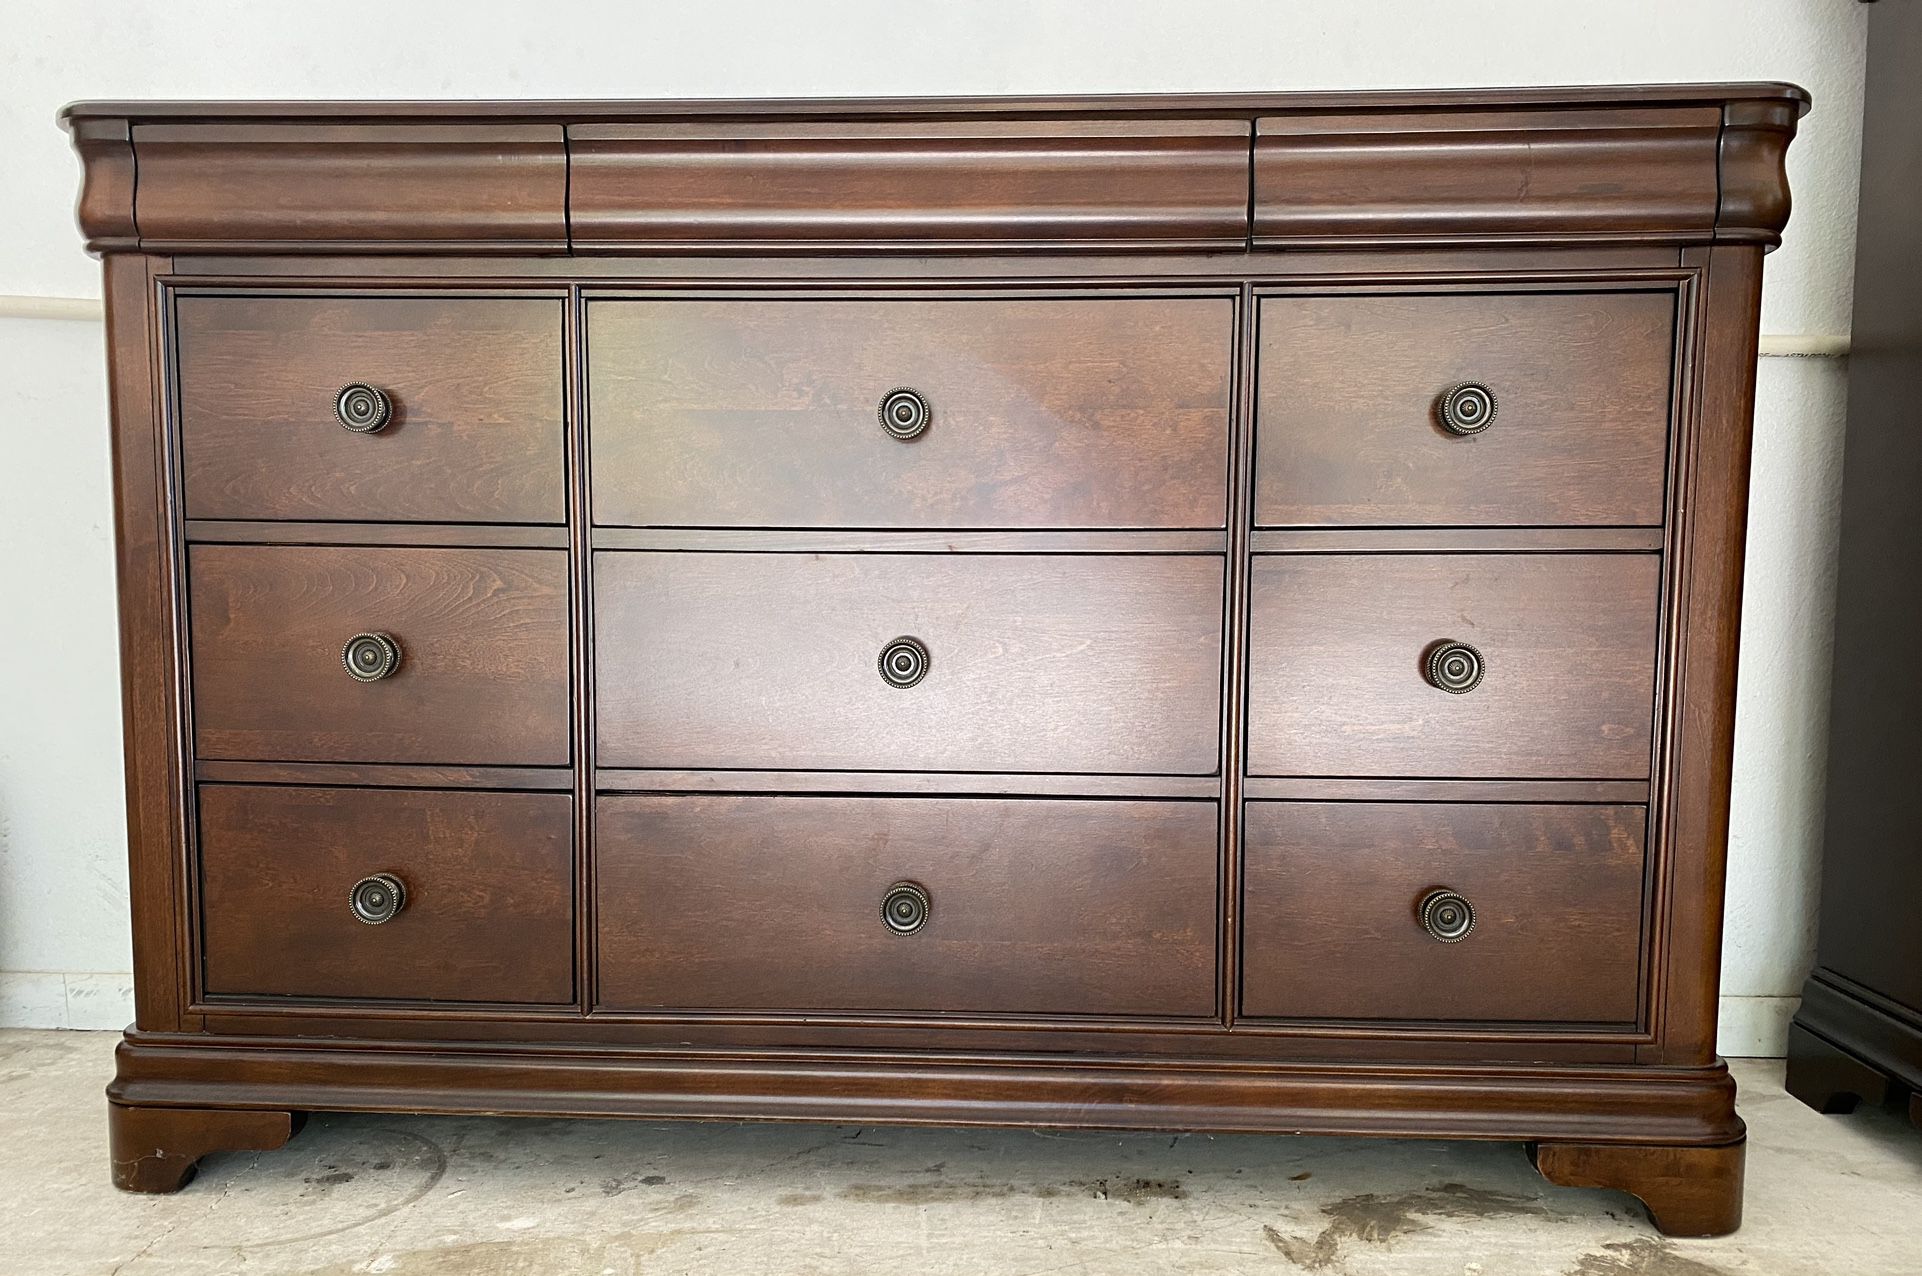 Mahogany Dresser In Great Condition 